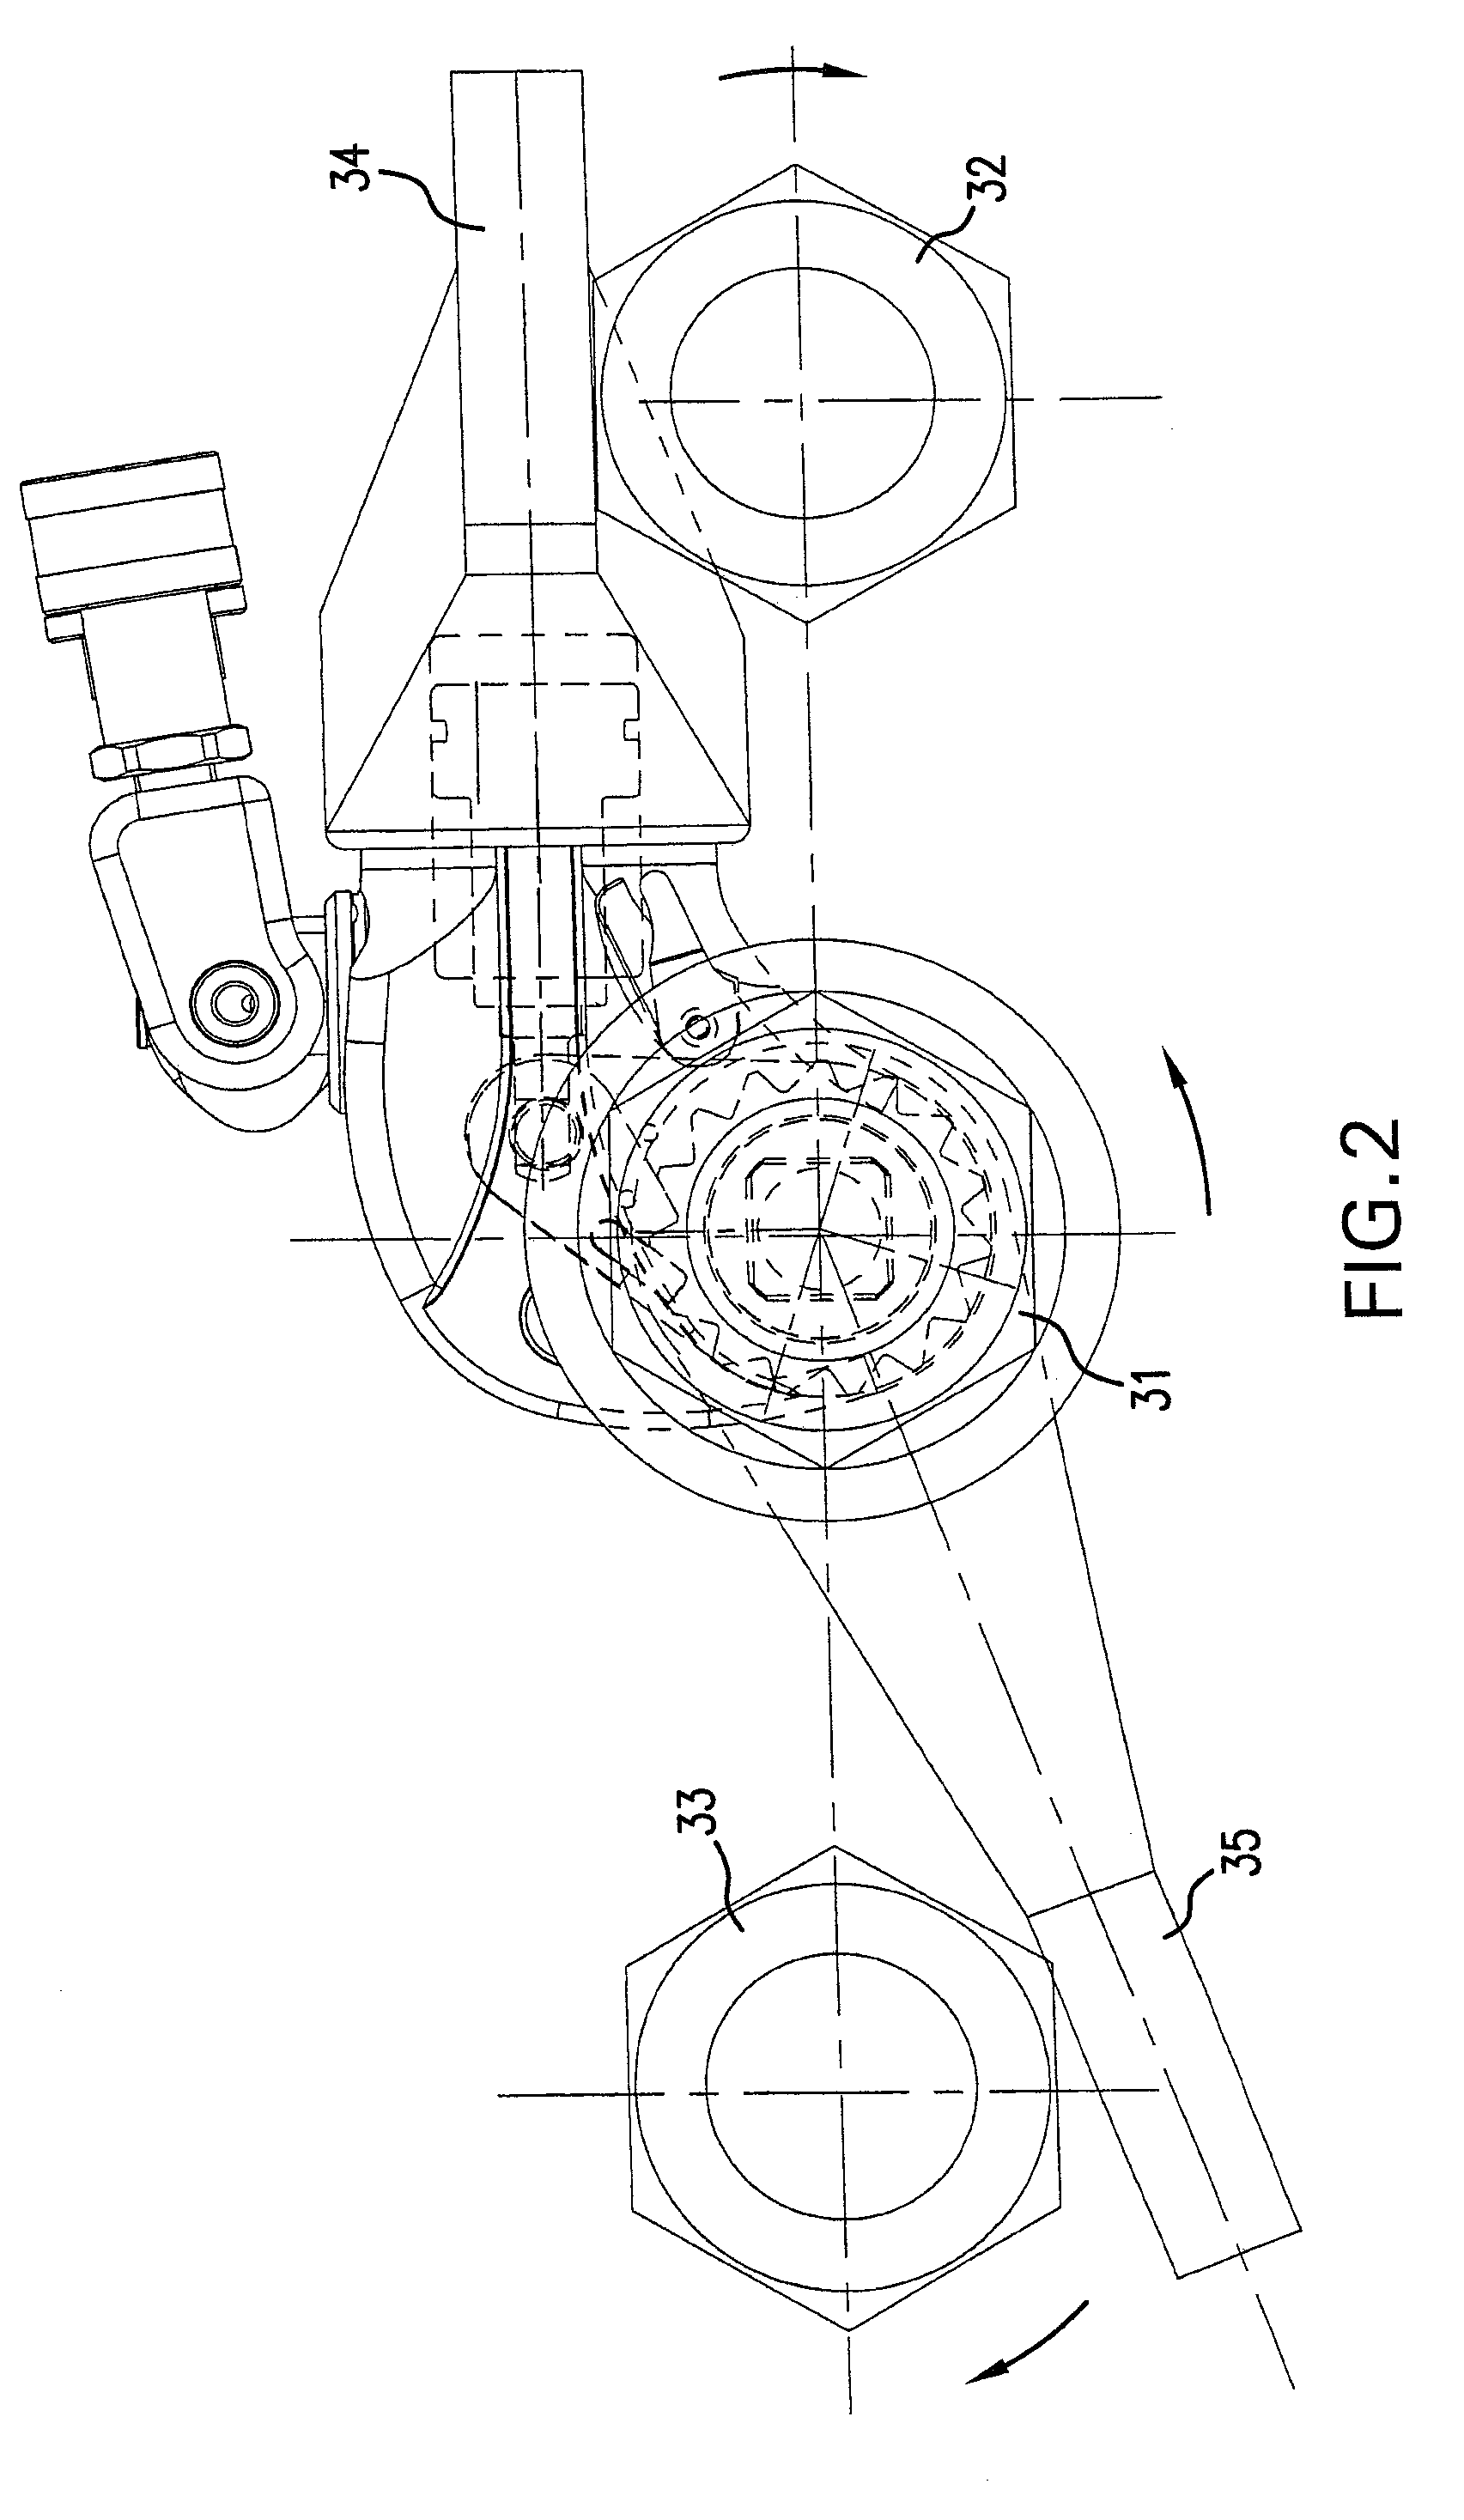 Fluid-operated torque wrench for and method of tightening or loosening fasteners